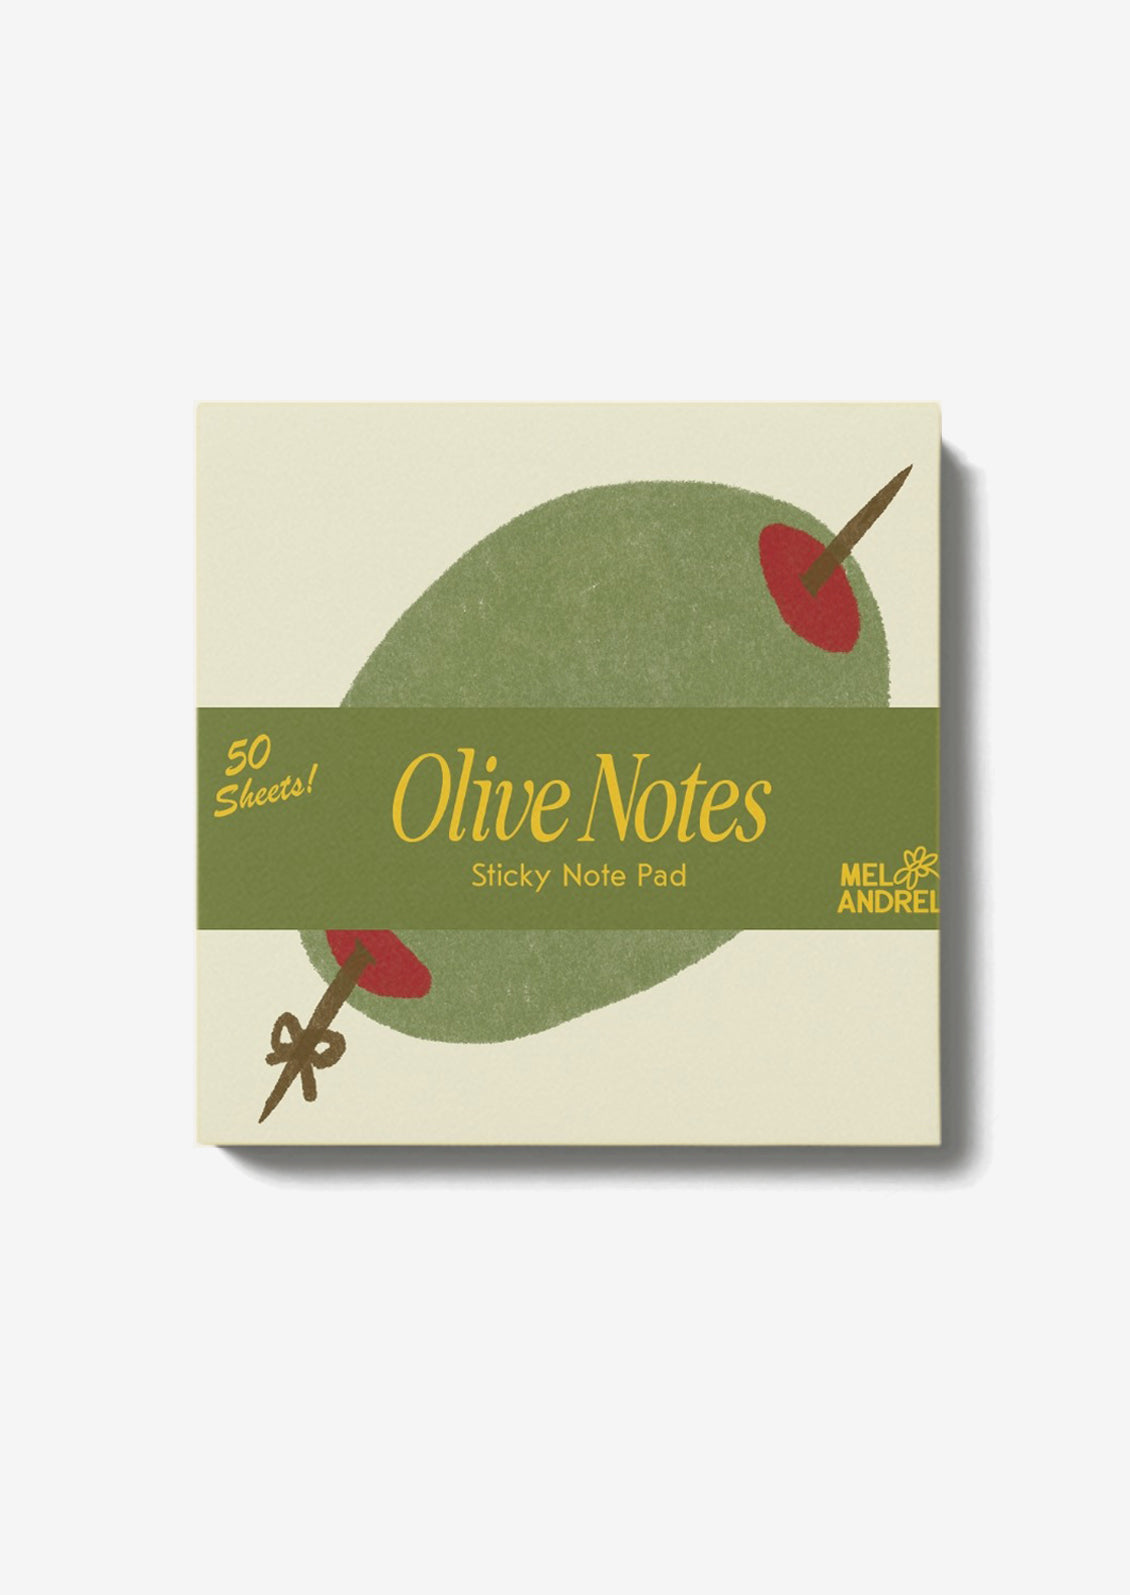 A stack of sticky notes with printed olive theme.